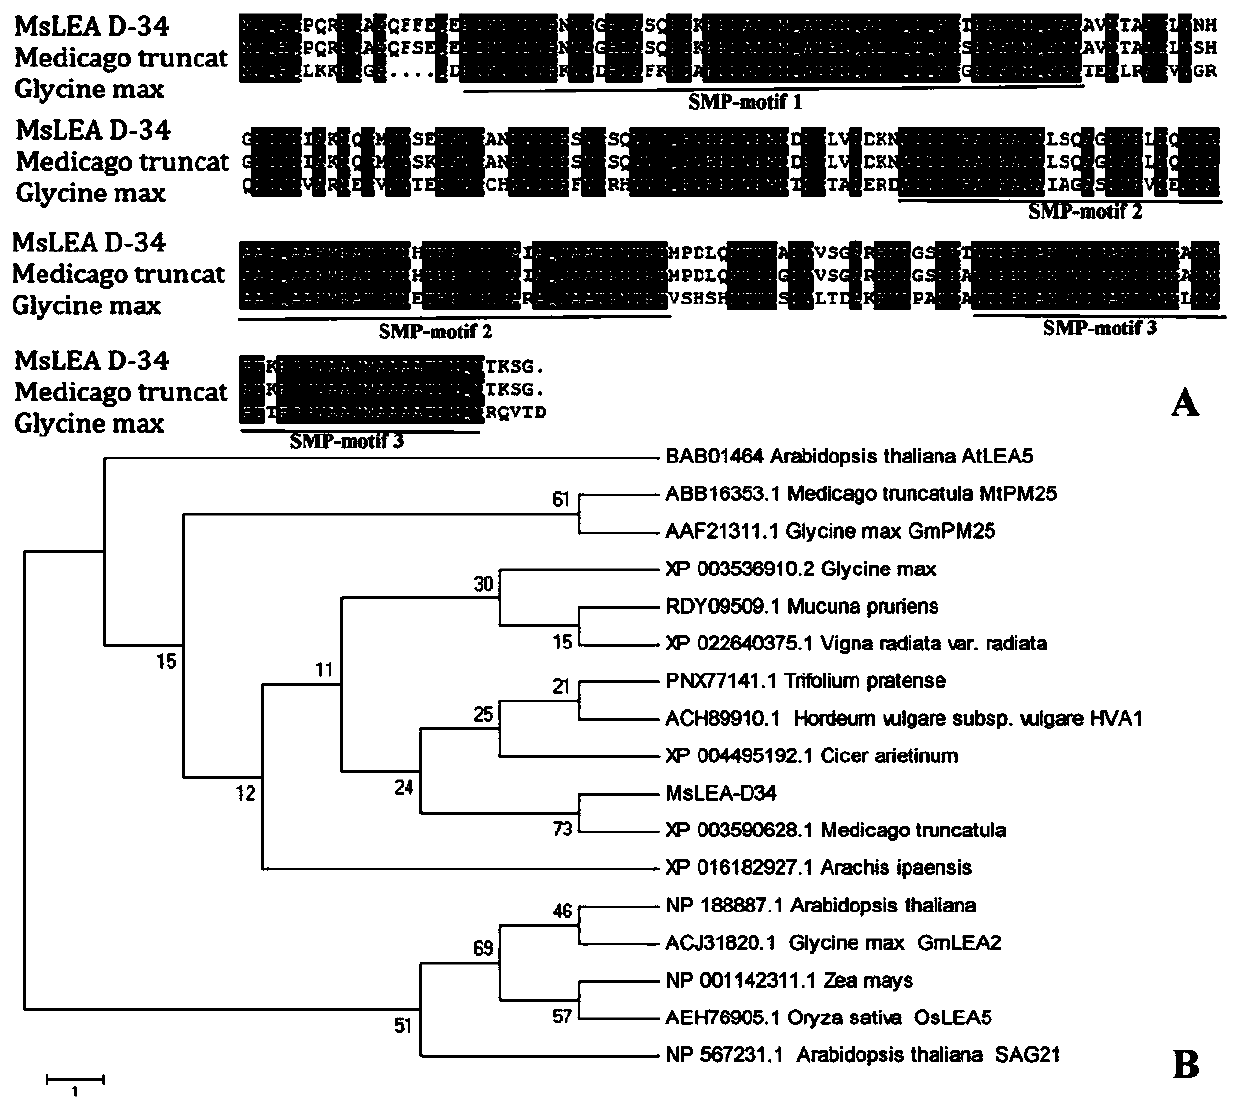 Protein MsLEA-D34 of medicago sativa 'WL525' at late embryonic development period and coding gene of protein MsLEA-D34